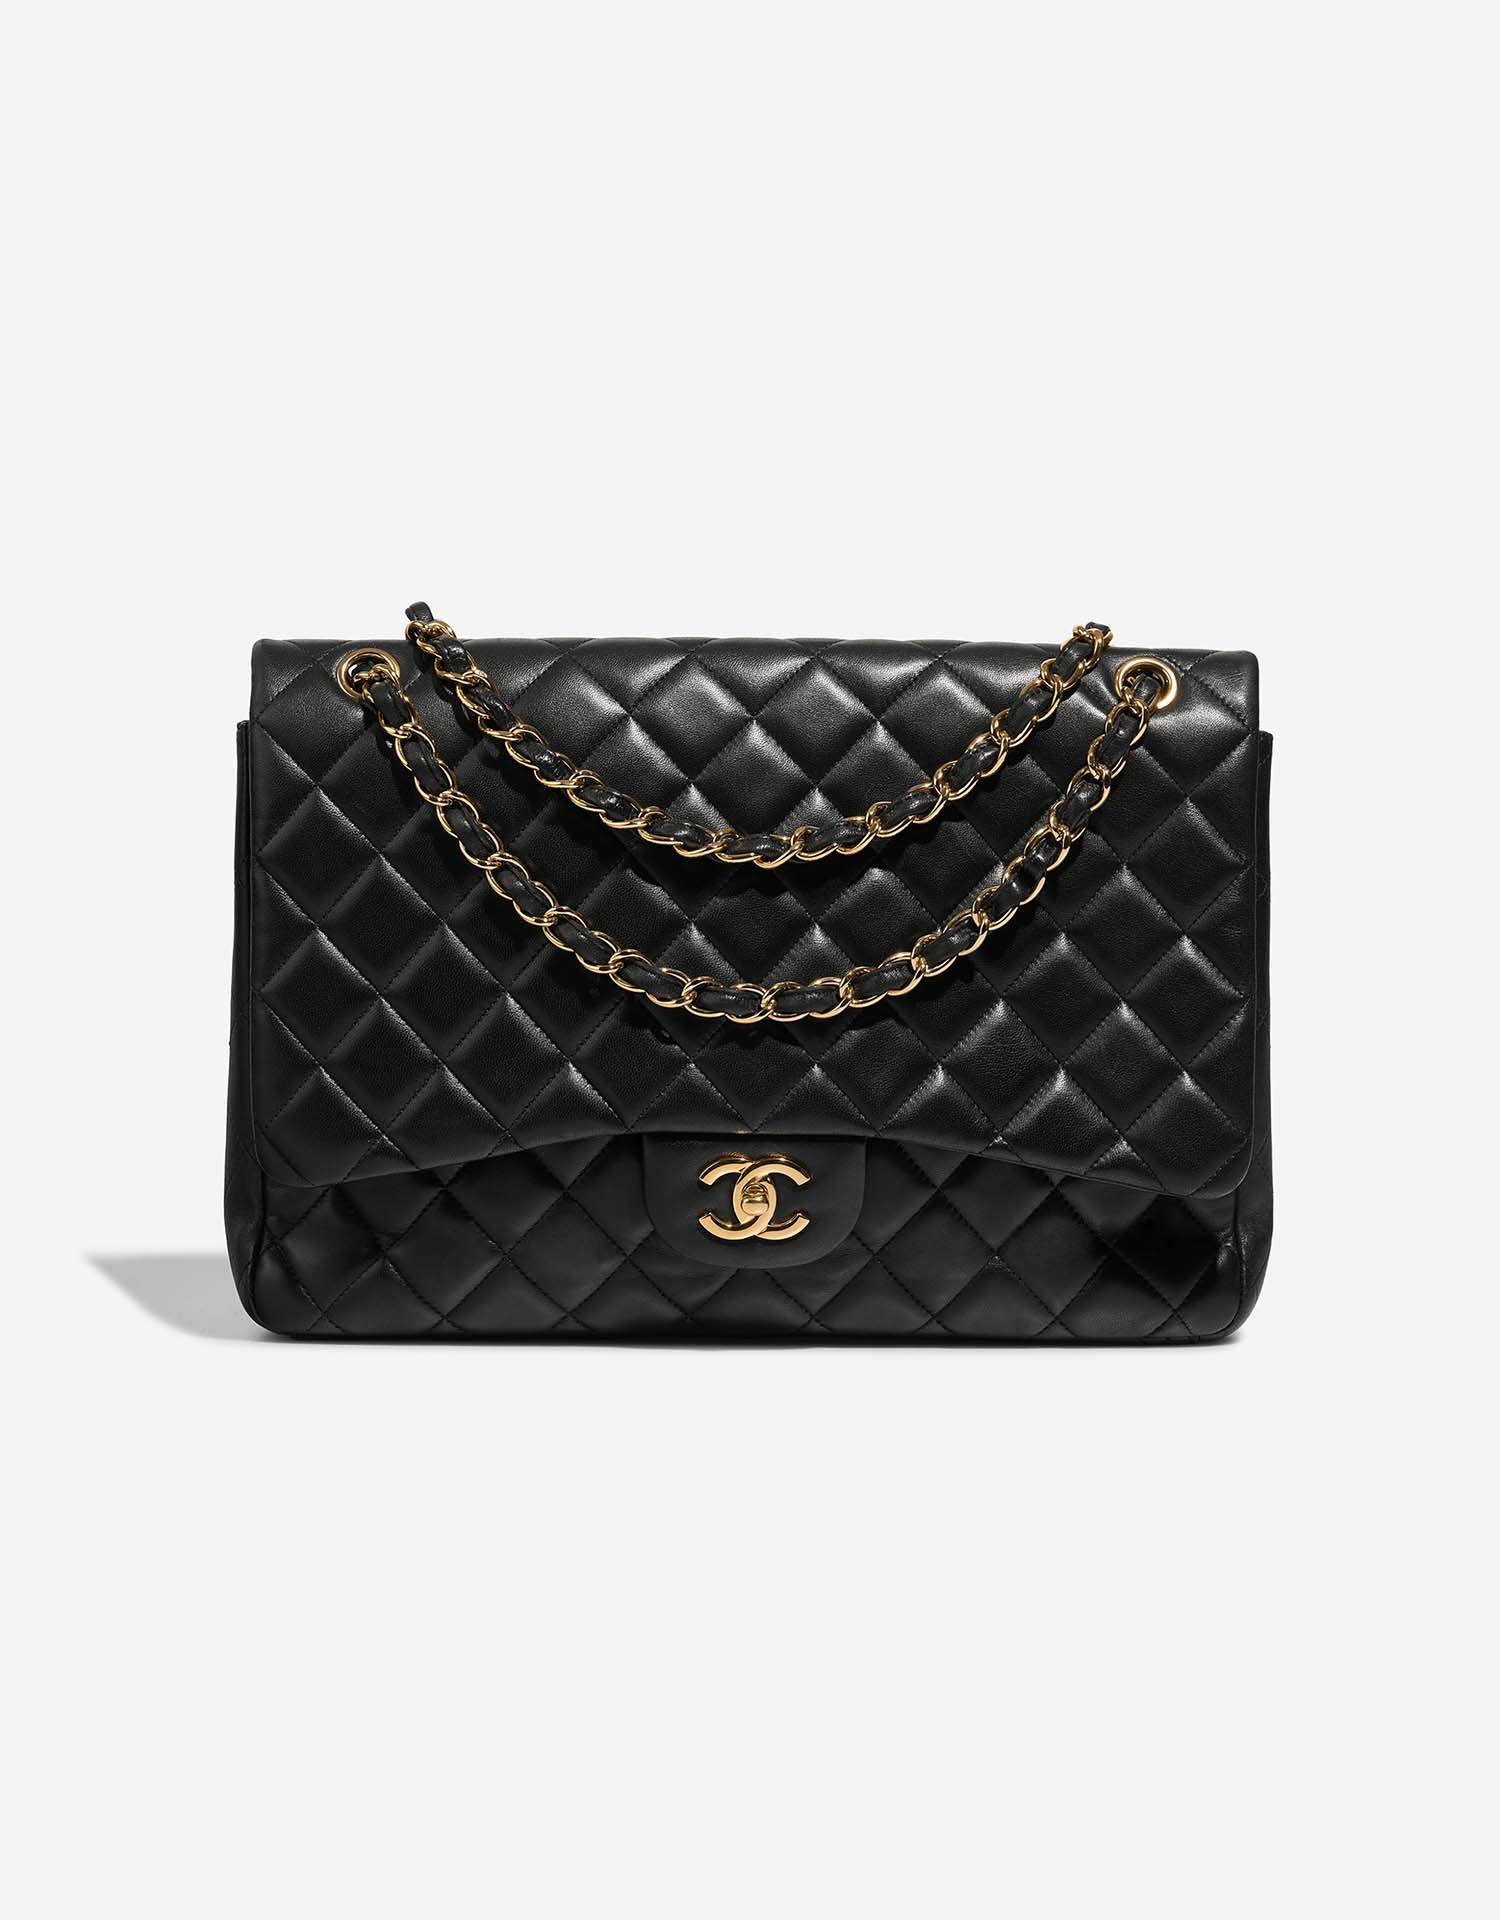 Chanel Timeless / Classic Medium Vintage bag in black leather